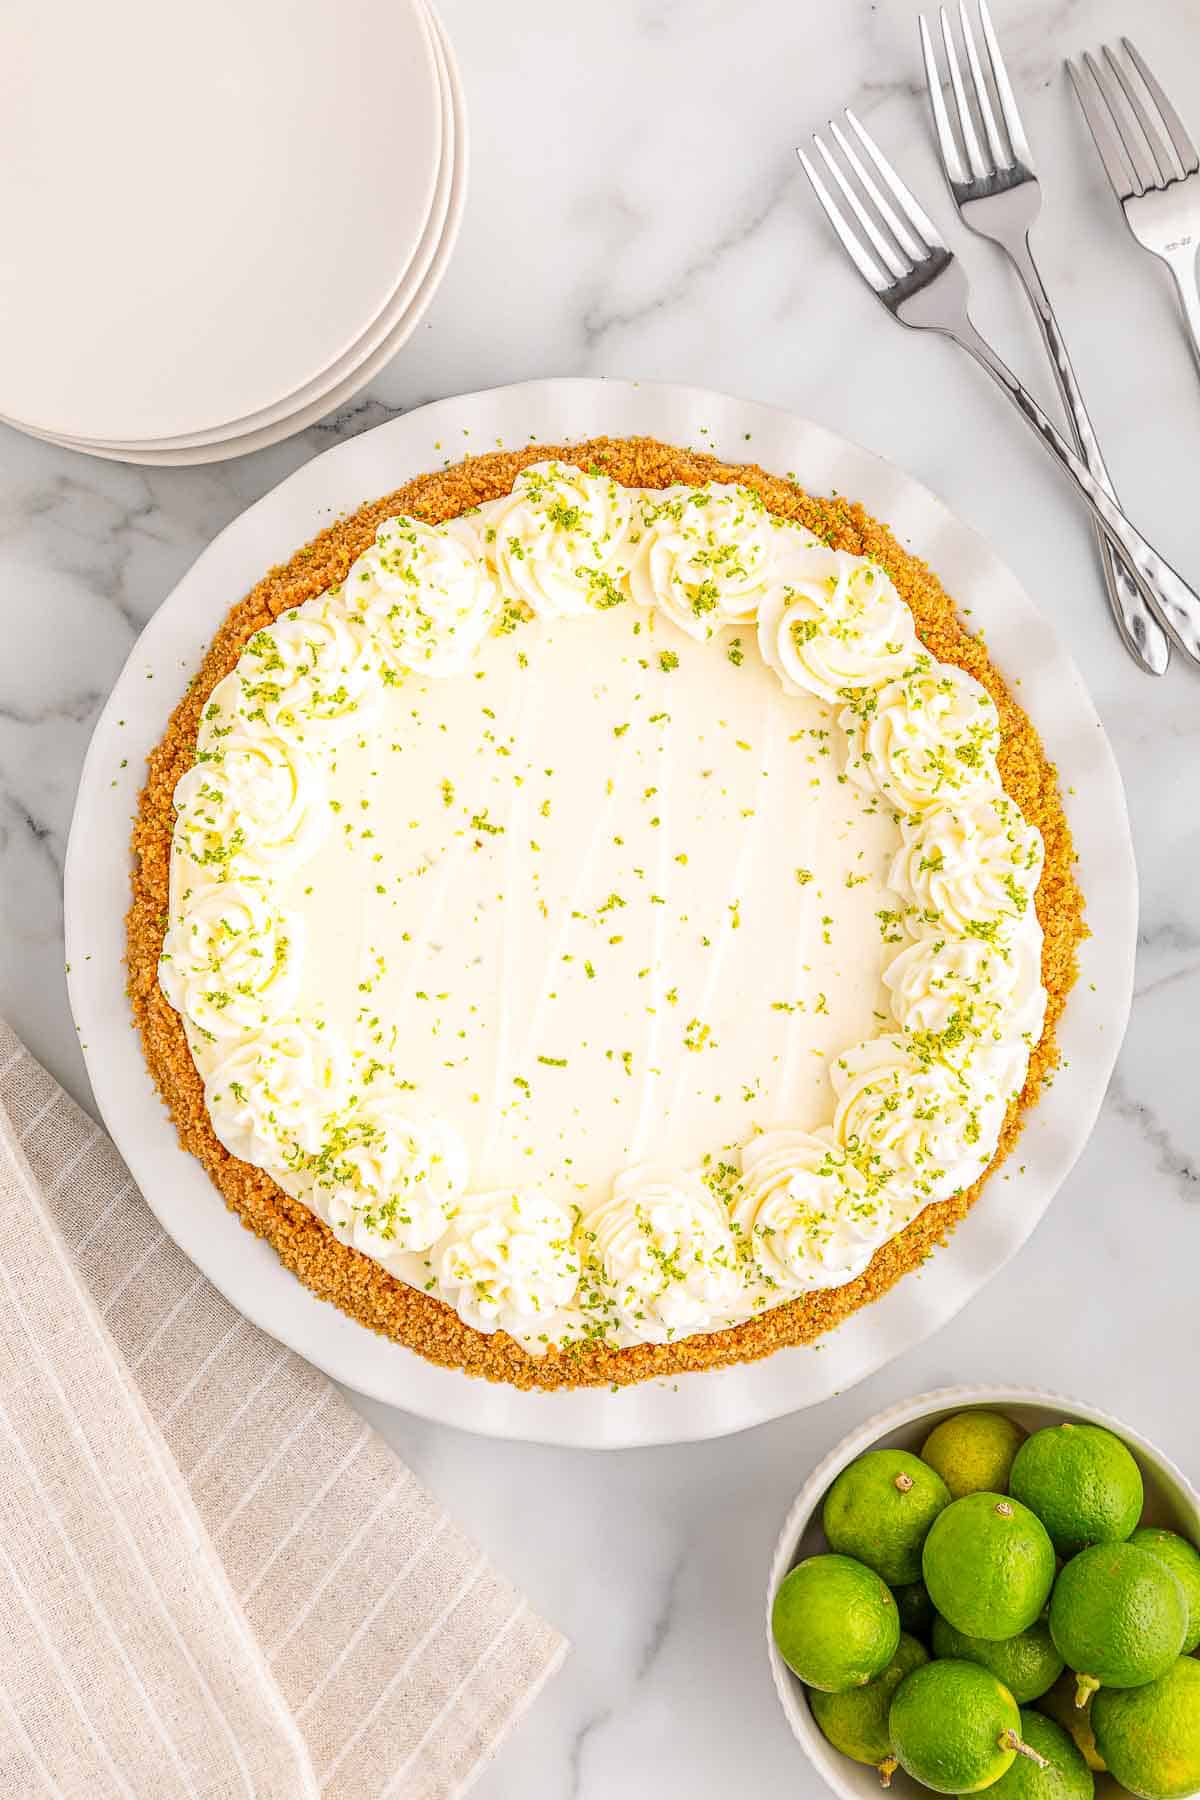 A key lime pie piped with whipped cream and garnished with lime zest on a white plate.